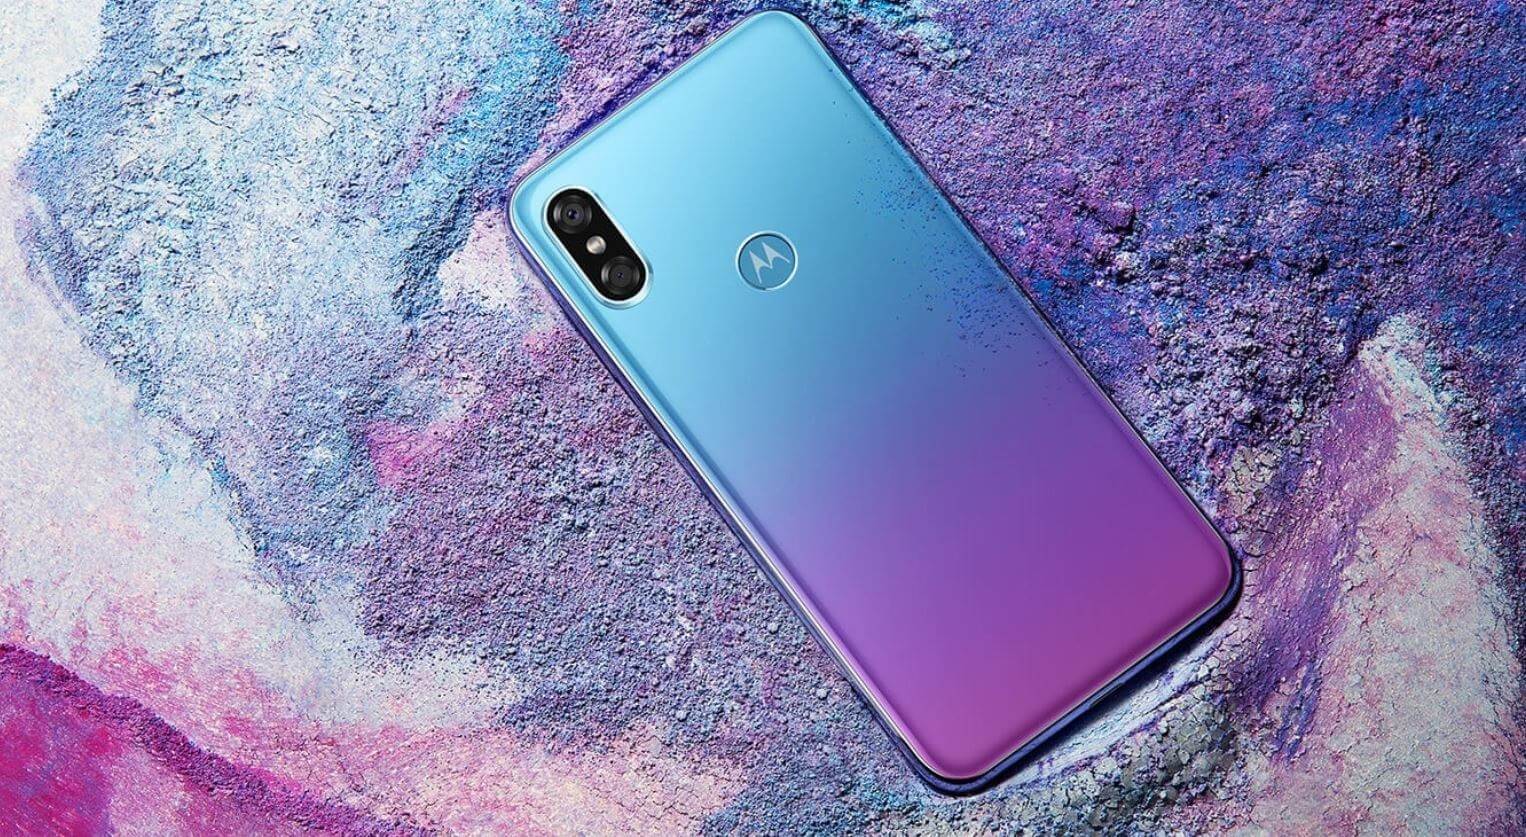 Motorola's P30 looks like an iPhone X with a hint of Huawei's P20